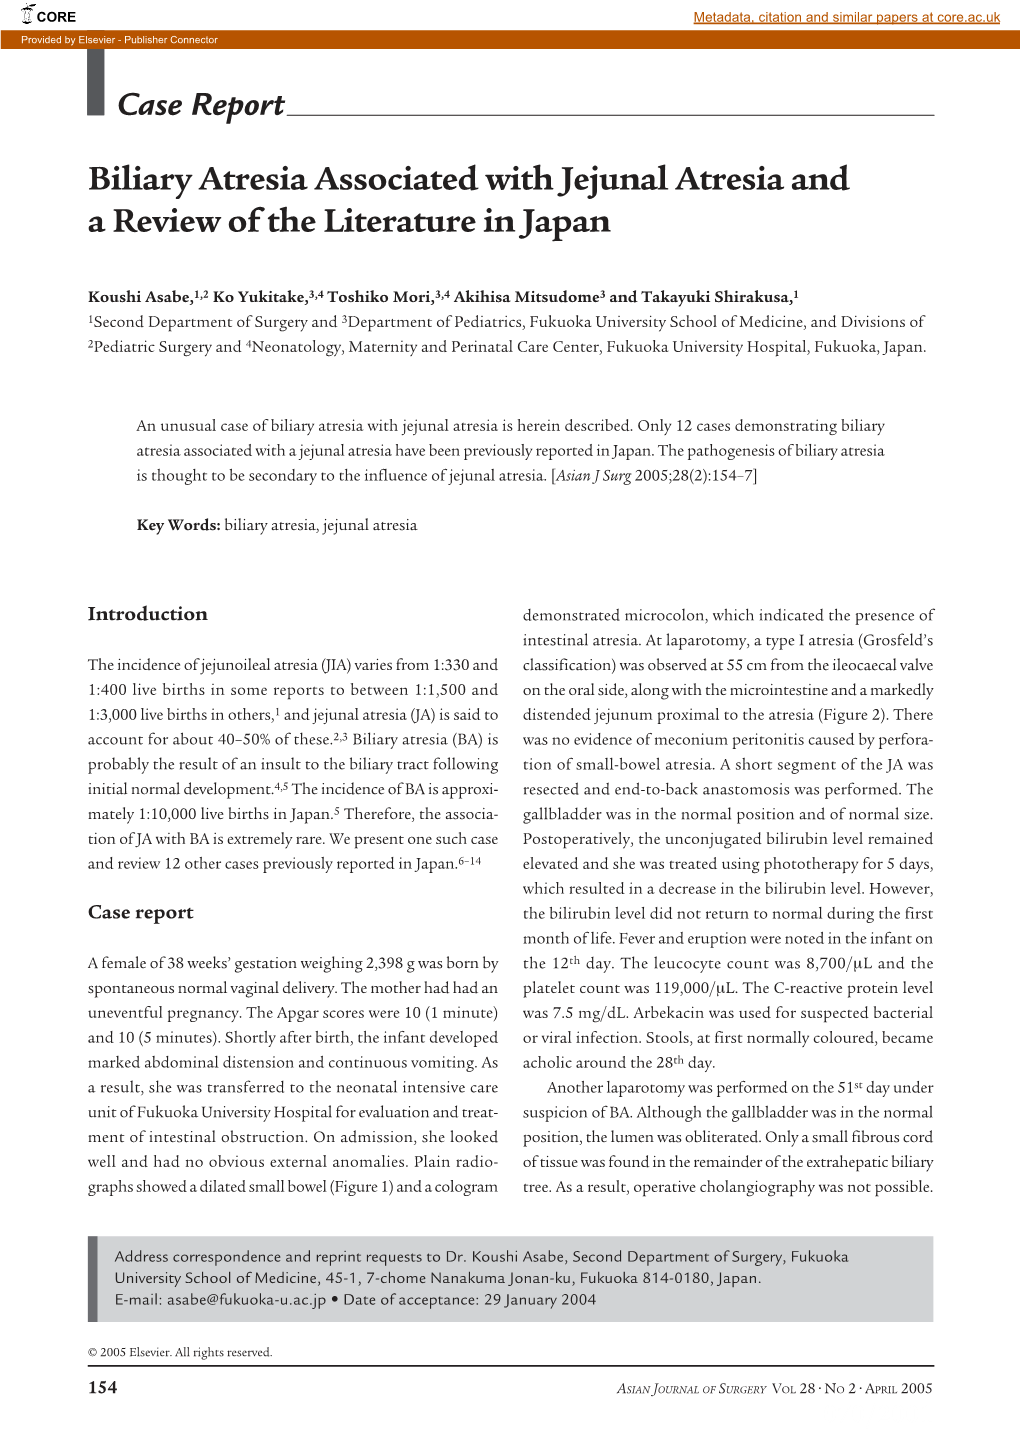 Biliary Atresia Associated with Jejunal Atresia and a Review of the Literature in Japan